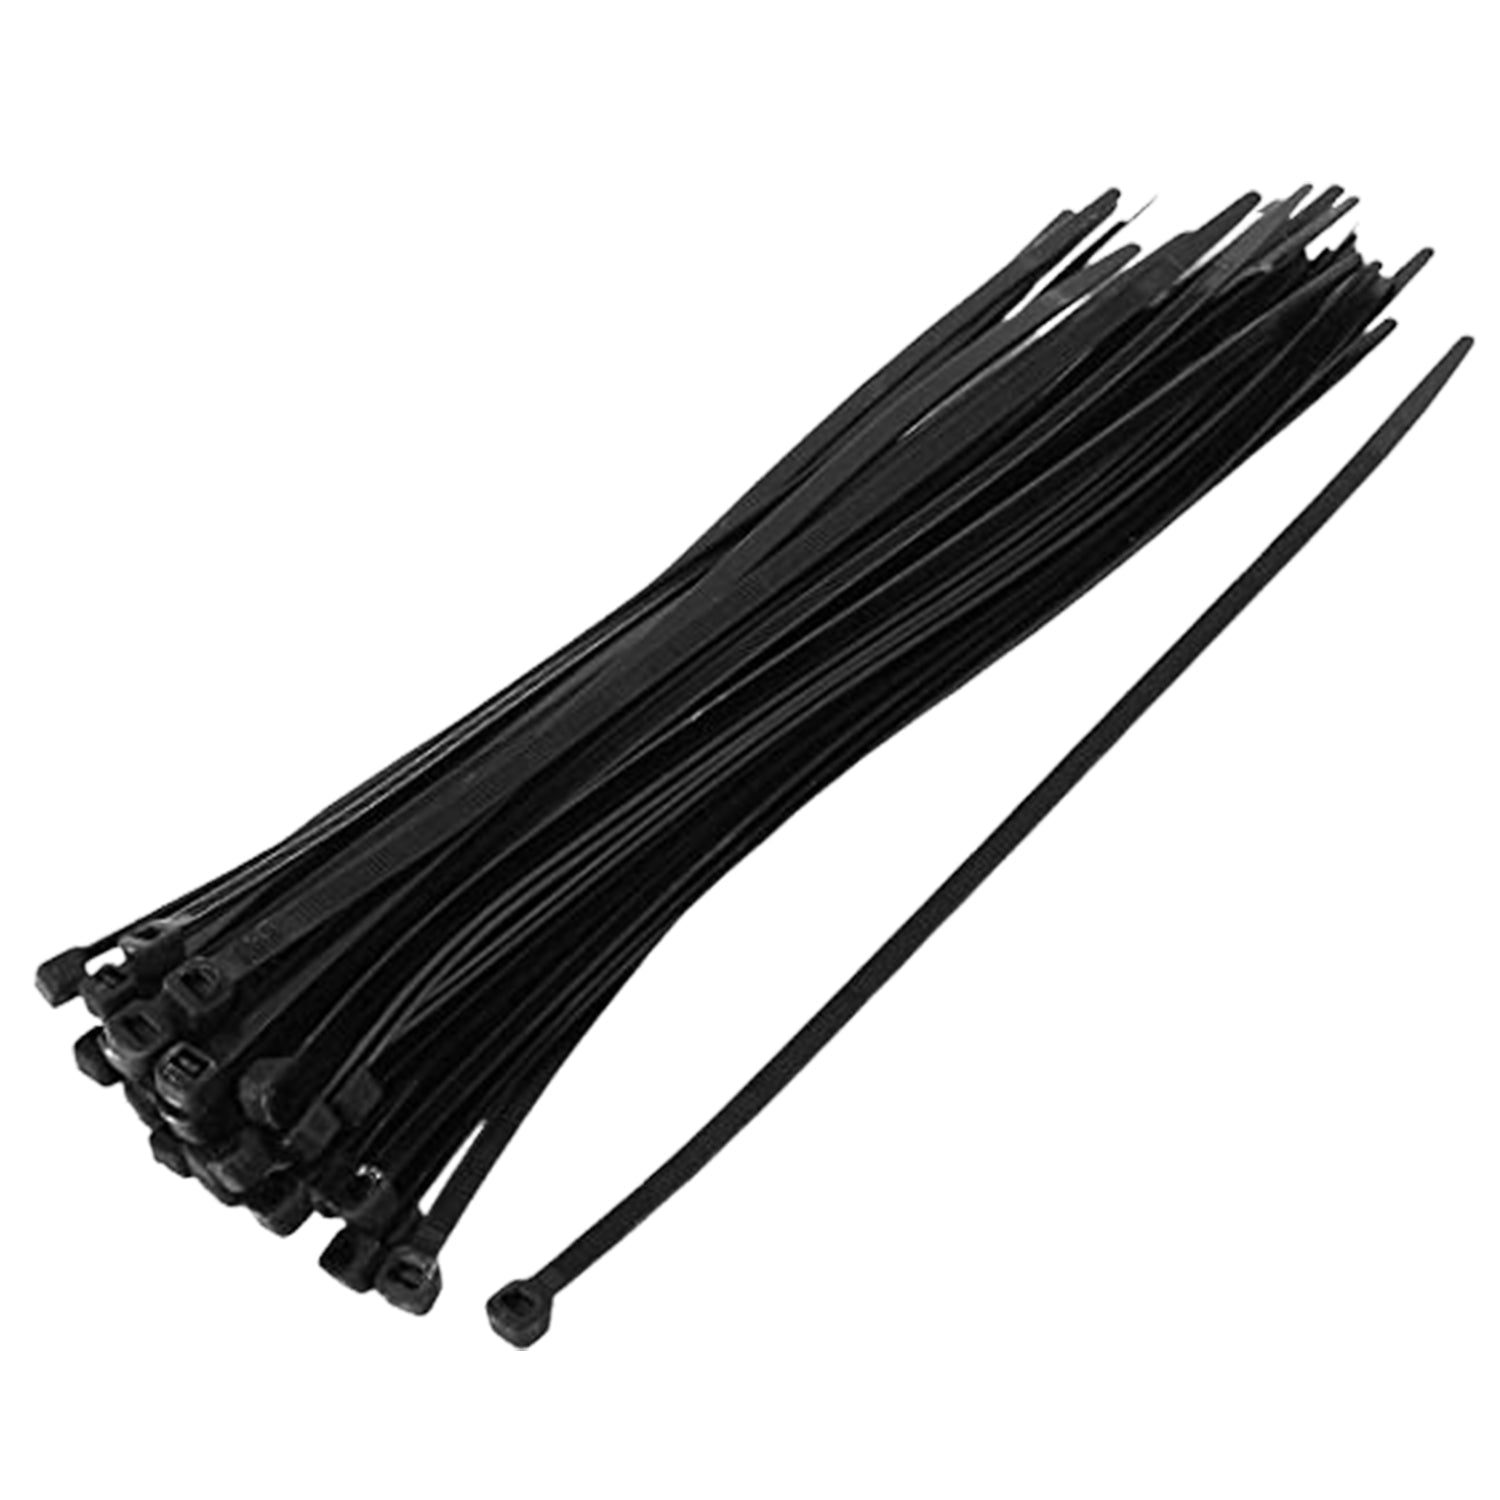 3139 6Inch Nylon Self Locking Cable Ties, Heavy Duty Strong Zip Wire Tie. Pack of 100 - Black. DeoDap